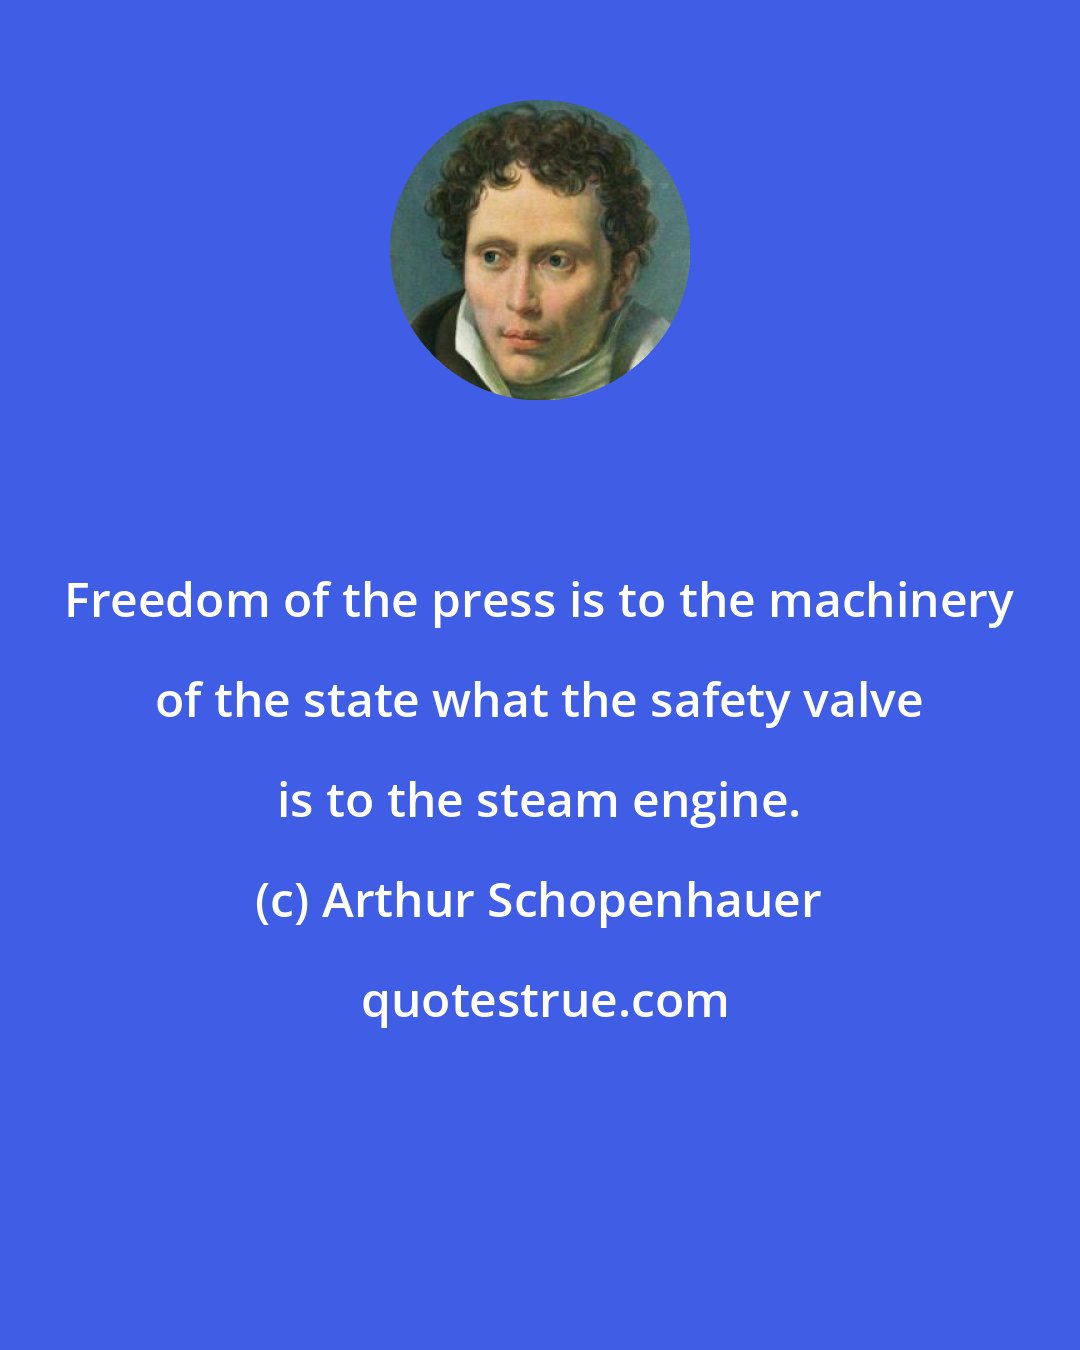 Arthur Schopenhauer: Freedom of the press is to the machinery of the state what the safety valve is to the steam engine.